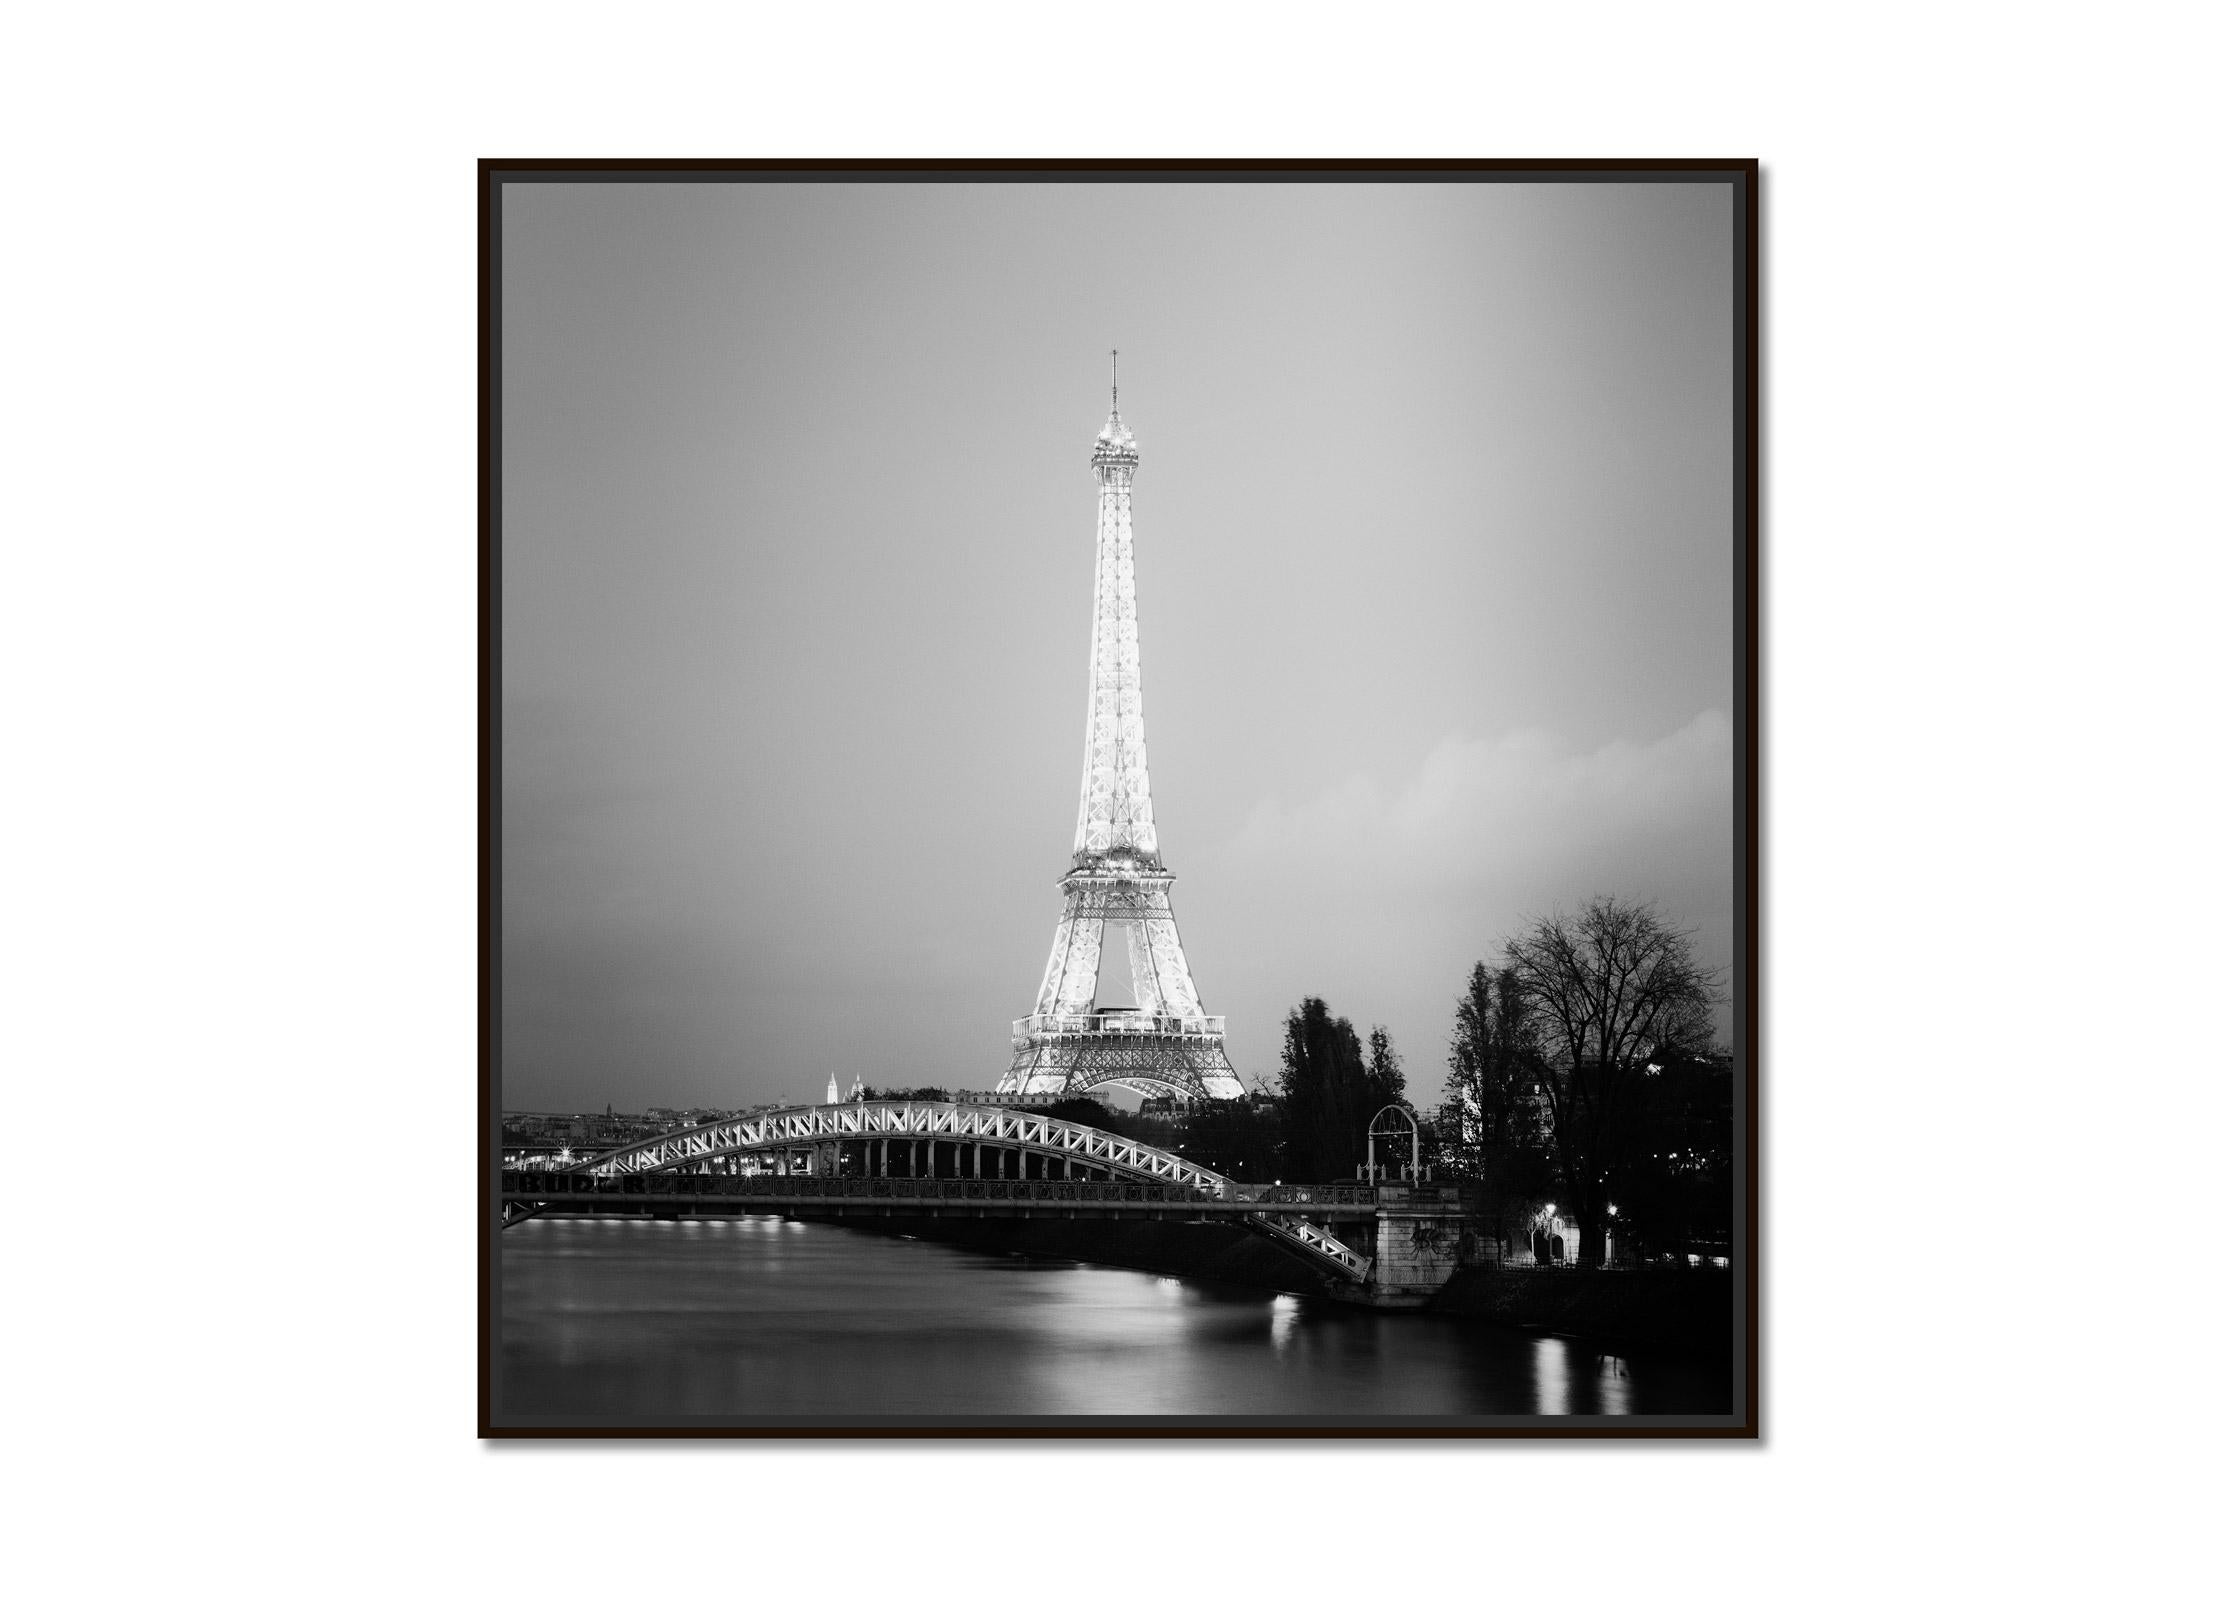 Eiffel Tower Night, Seine, Paris, France, Black and white cityscape photography - Photograph by Gerald Berghammer